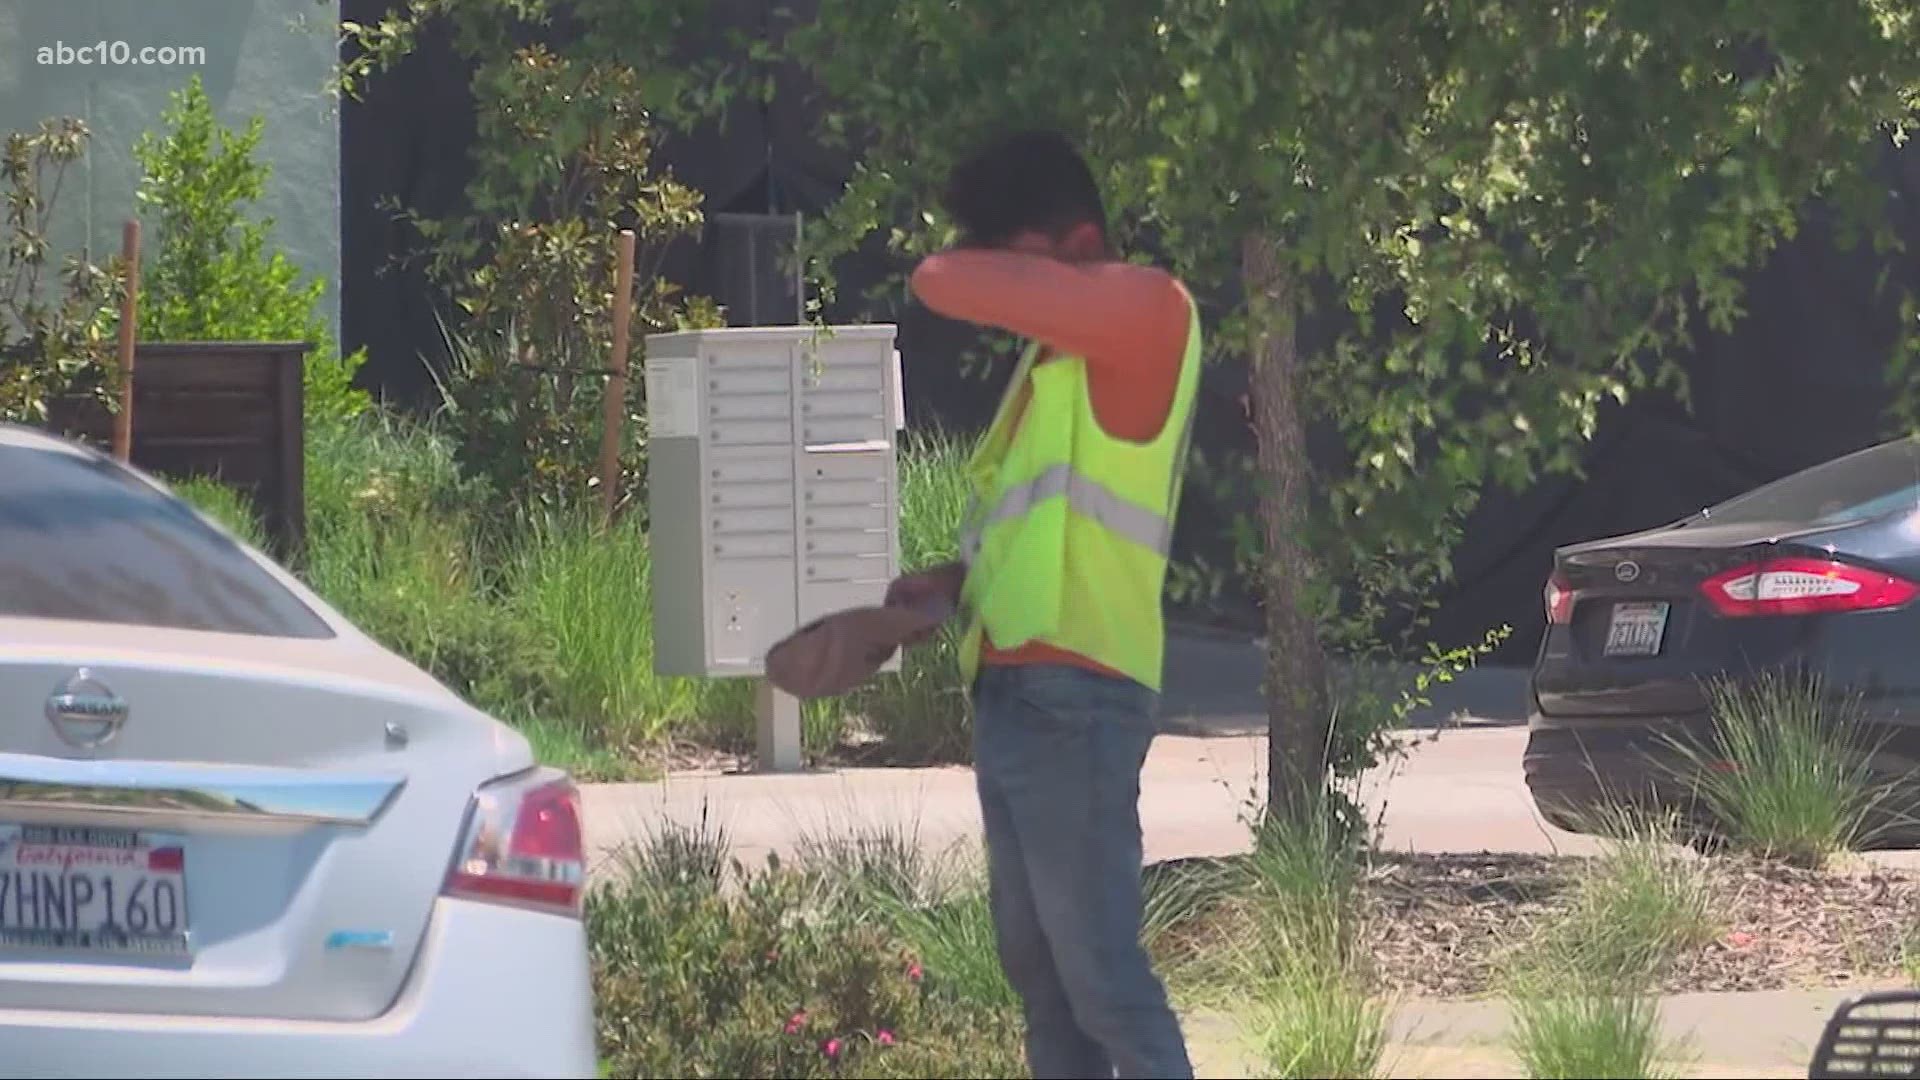 With the extreme heat across Sacramento, people who have no choice but to work outdoors are doing what they can to stay safe.